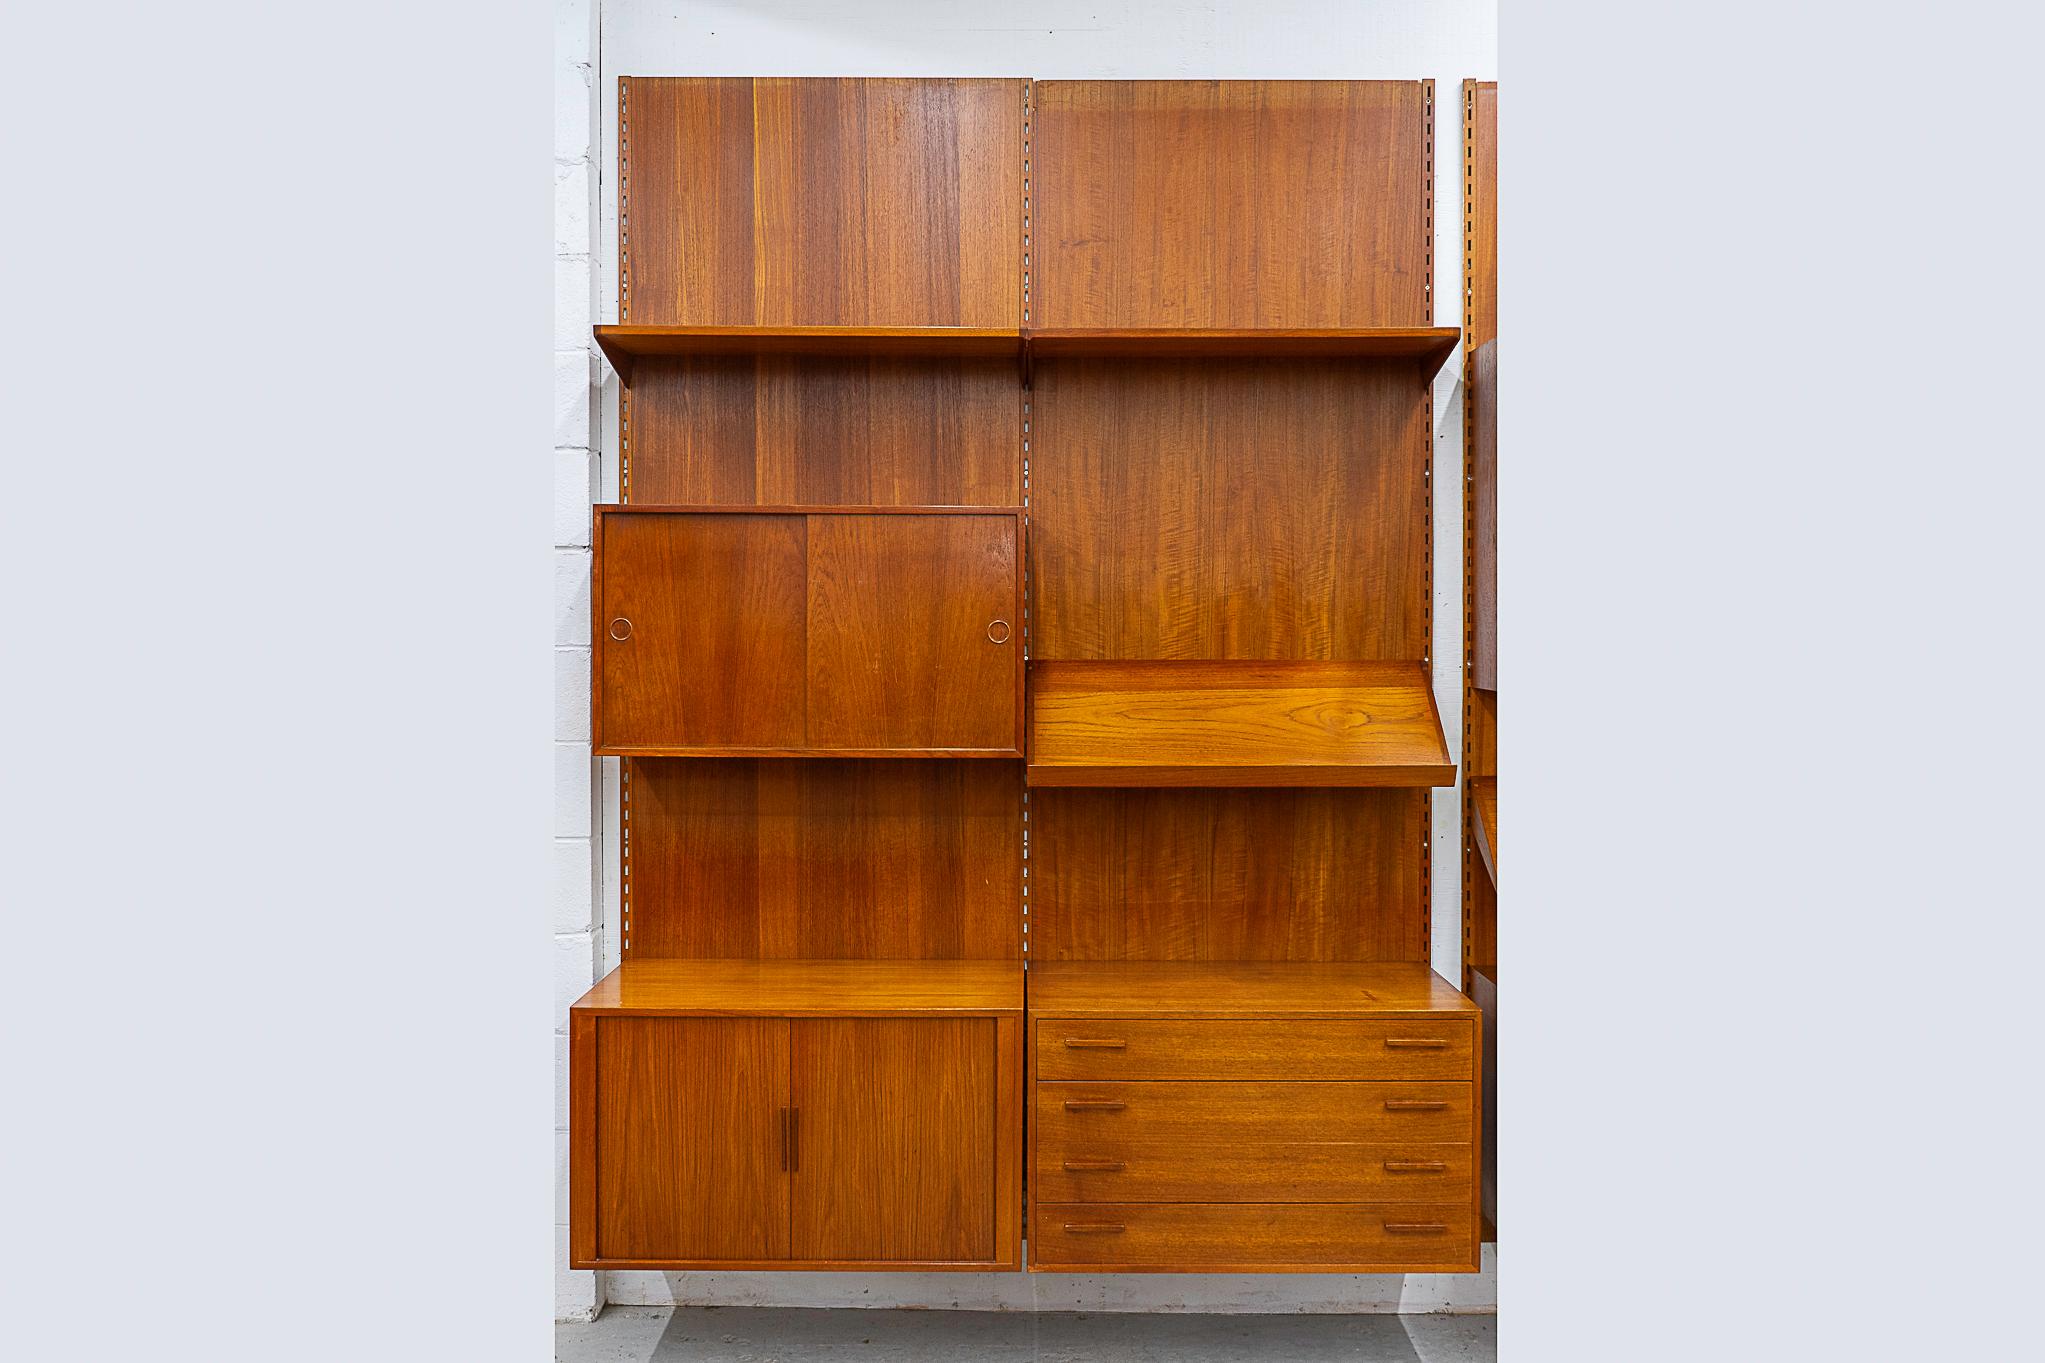 Teak Danish wall system by Kai Kristiansen, circa 1960's. Fantastic double bank wall system with stunning book-matched veneer and dovetail construction. Modular components mount with 3 rails, back panel use is optional. Includes: sliding door